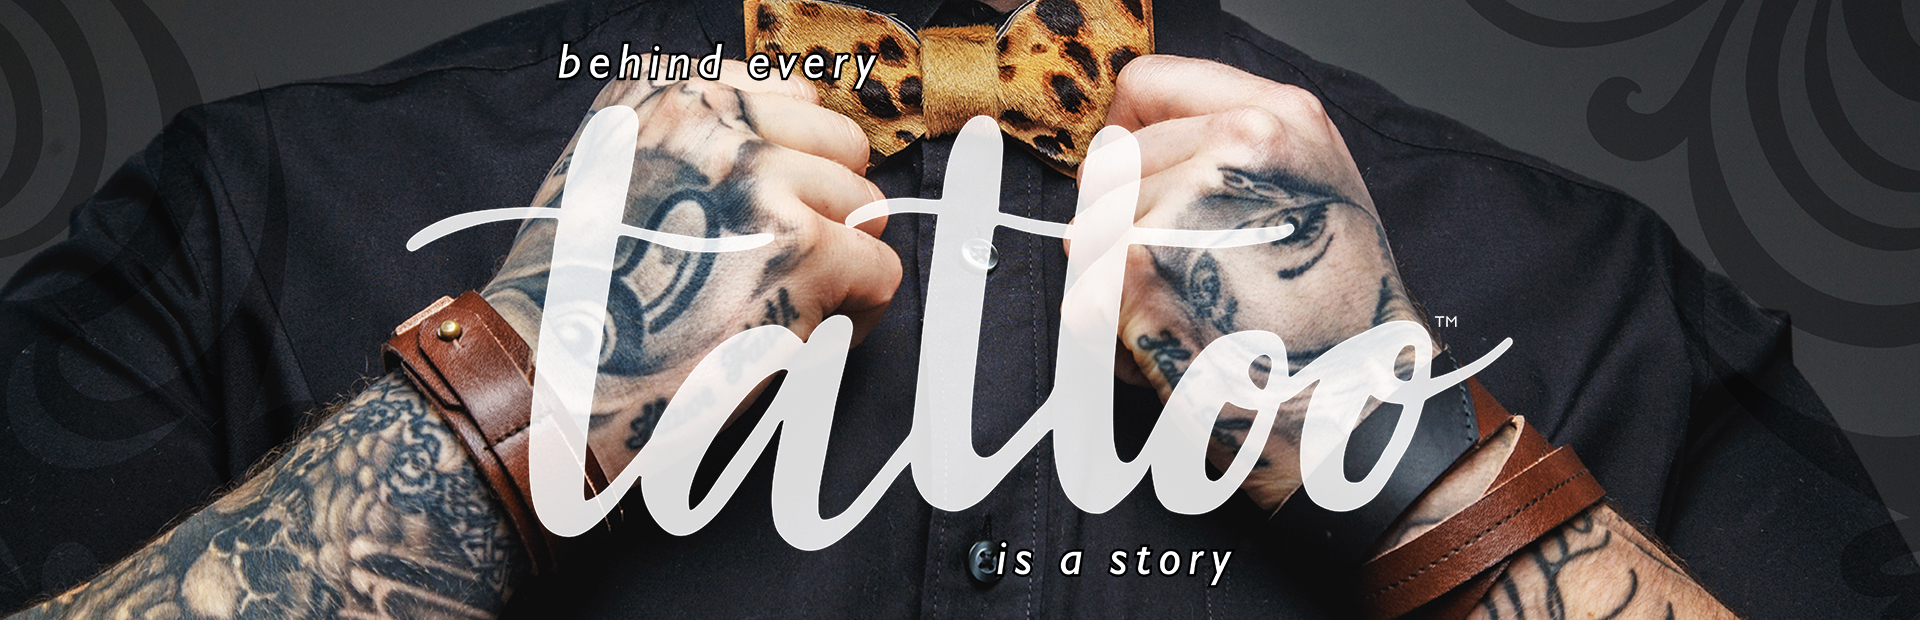 Behind Every Tattoo is a Story